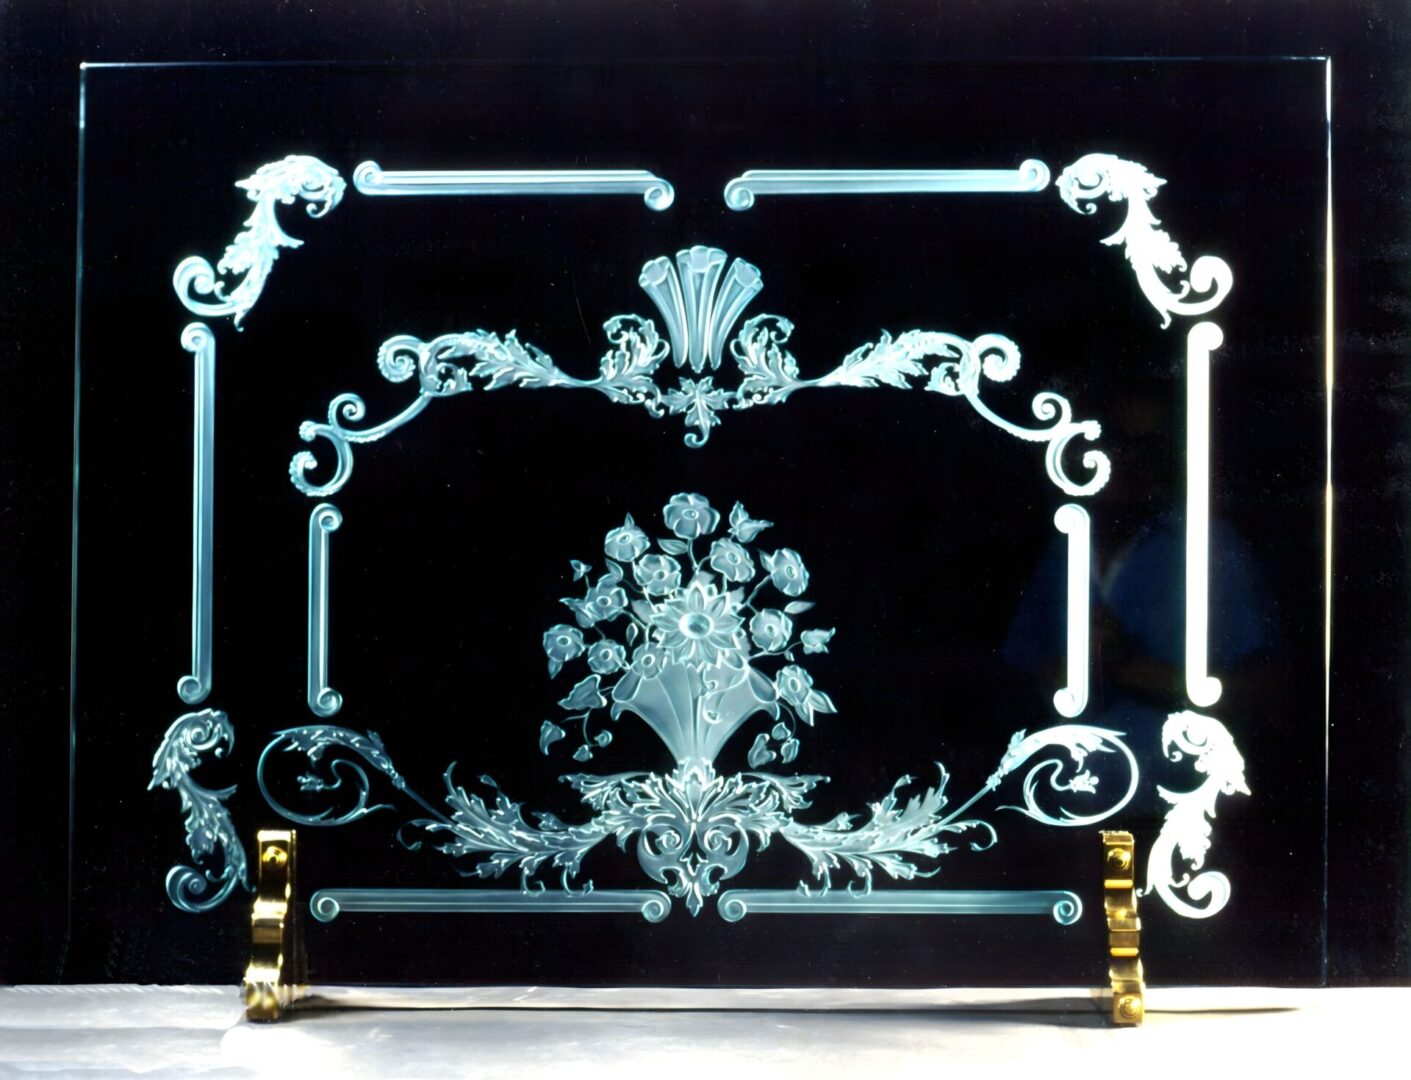 Ornate glass fireplace screen with white etched floral and scroll designs on a black background.